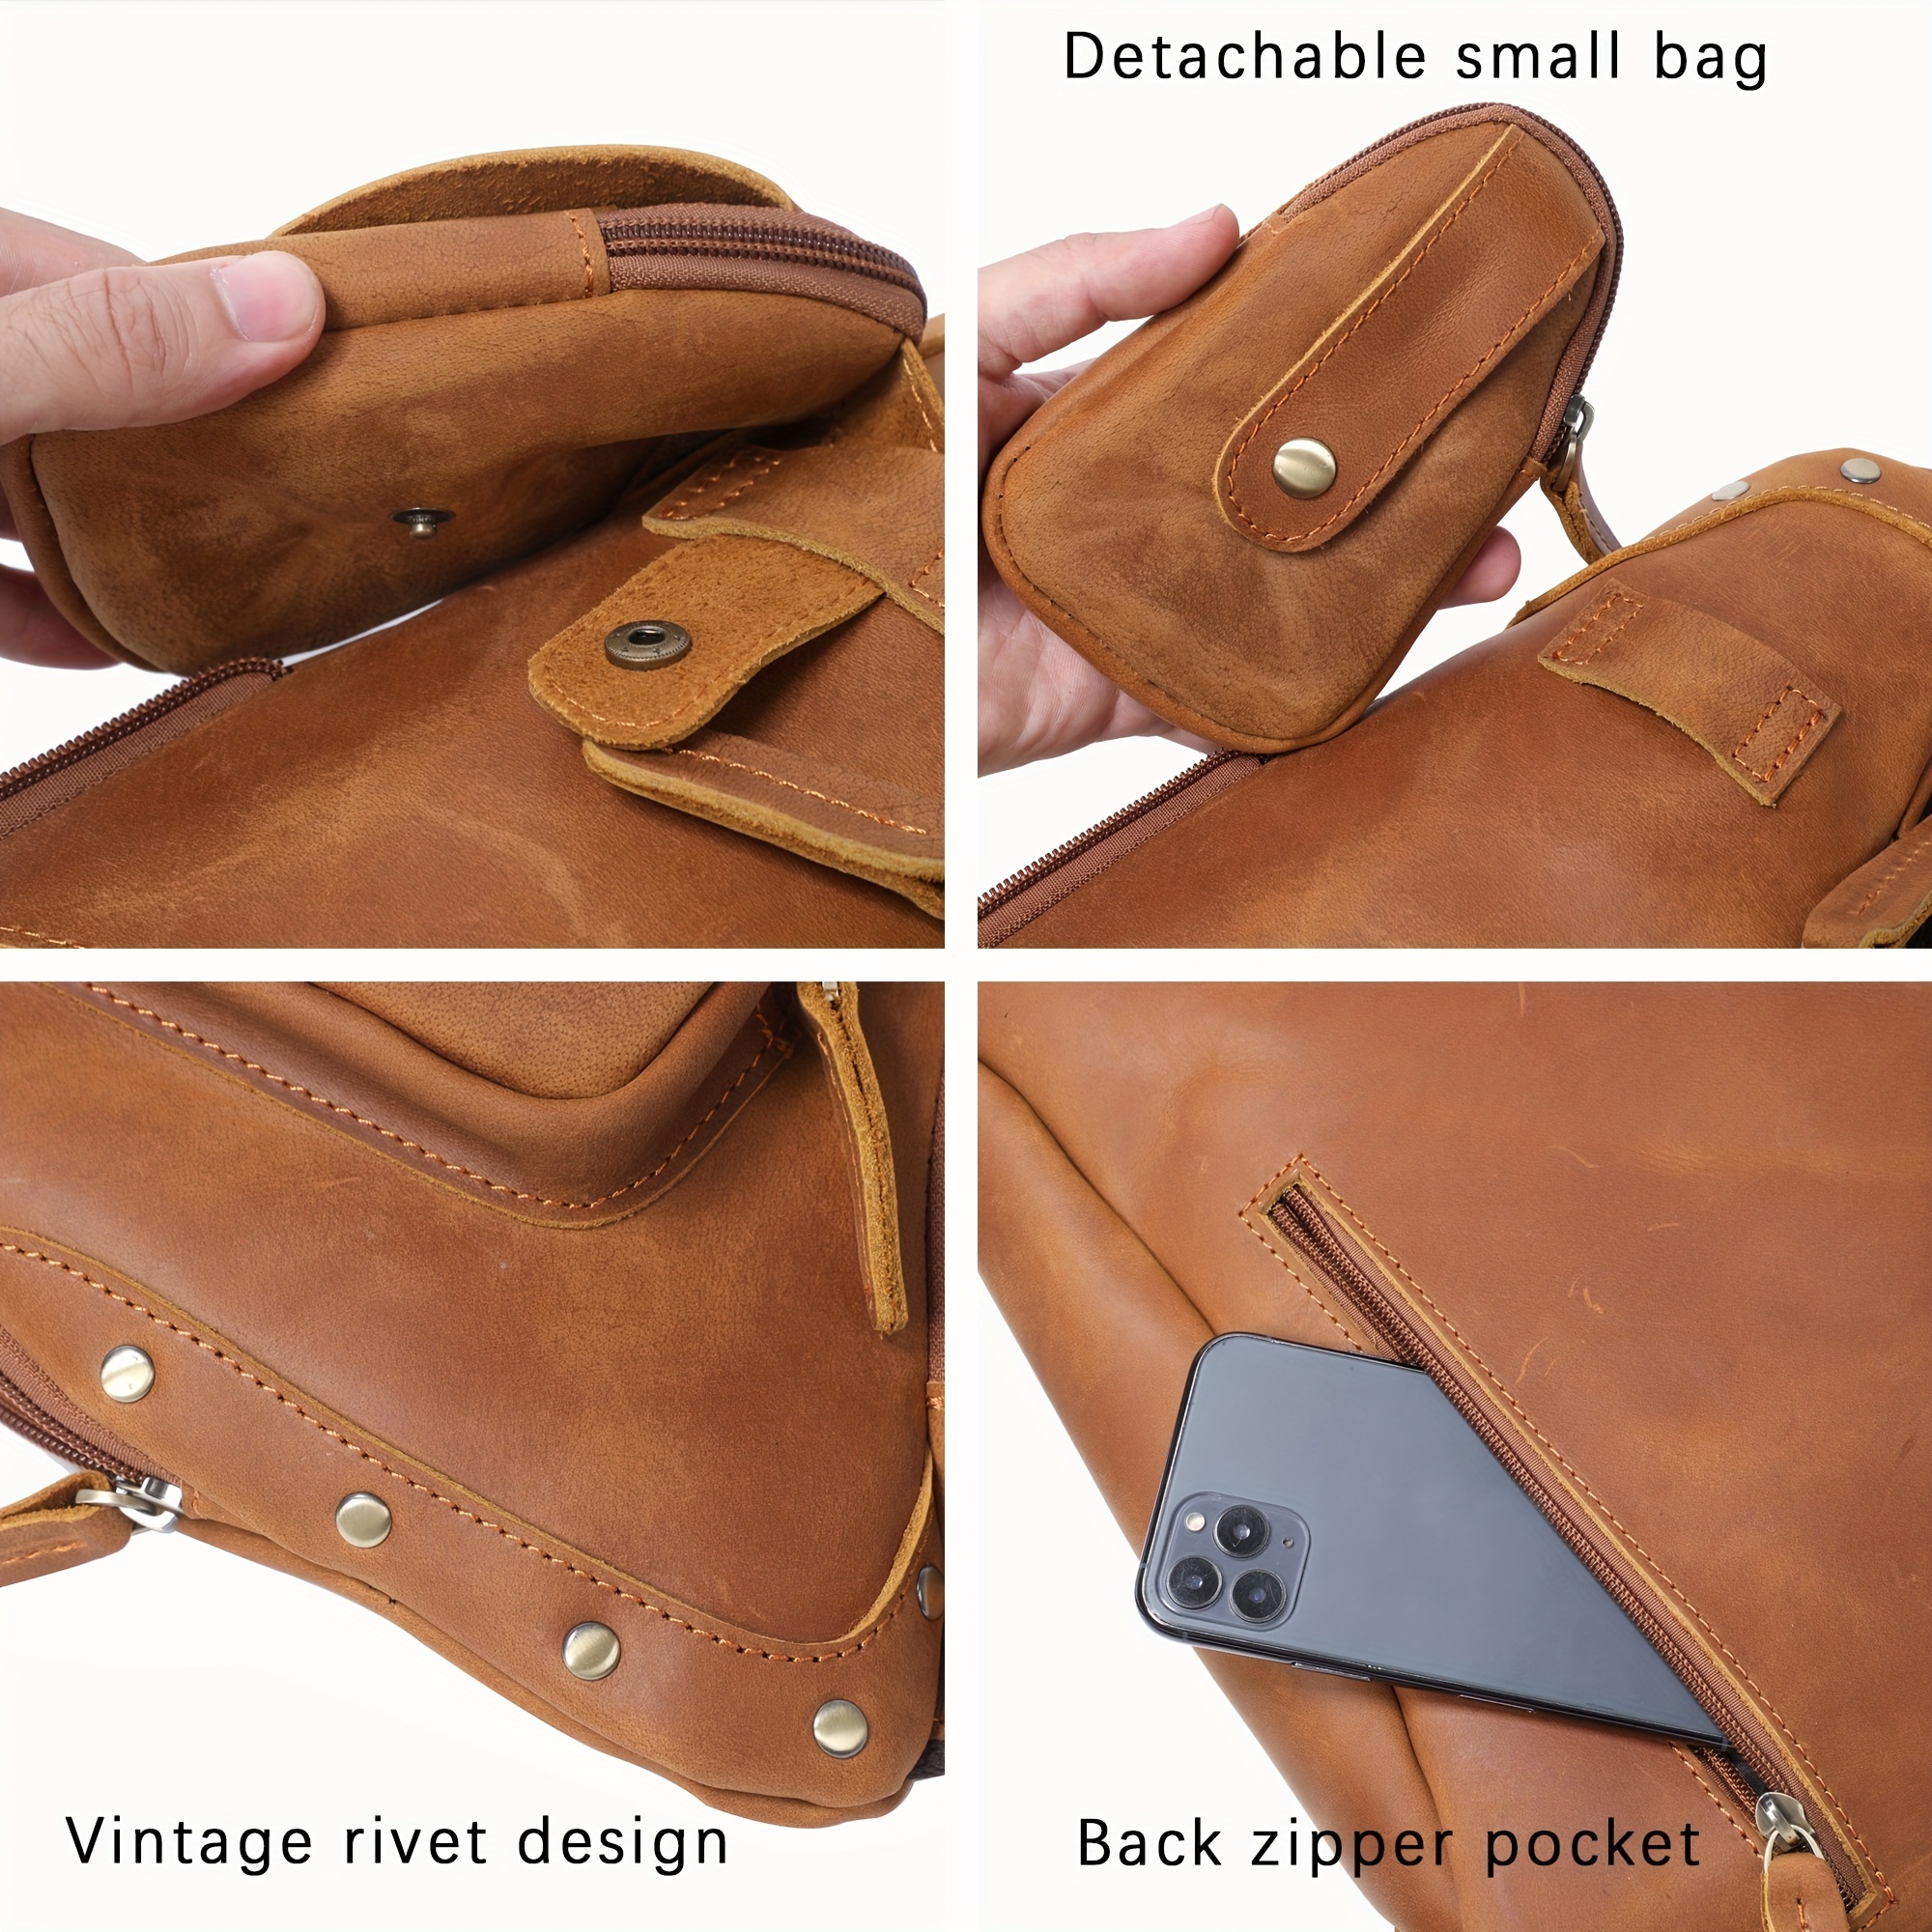 Casual Vintage Leather Mens Small Side Bag Small Messenger bag